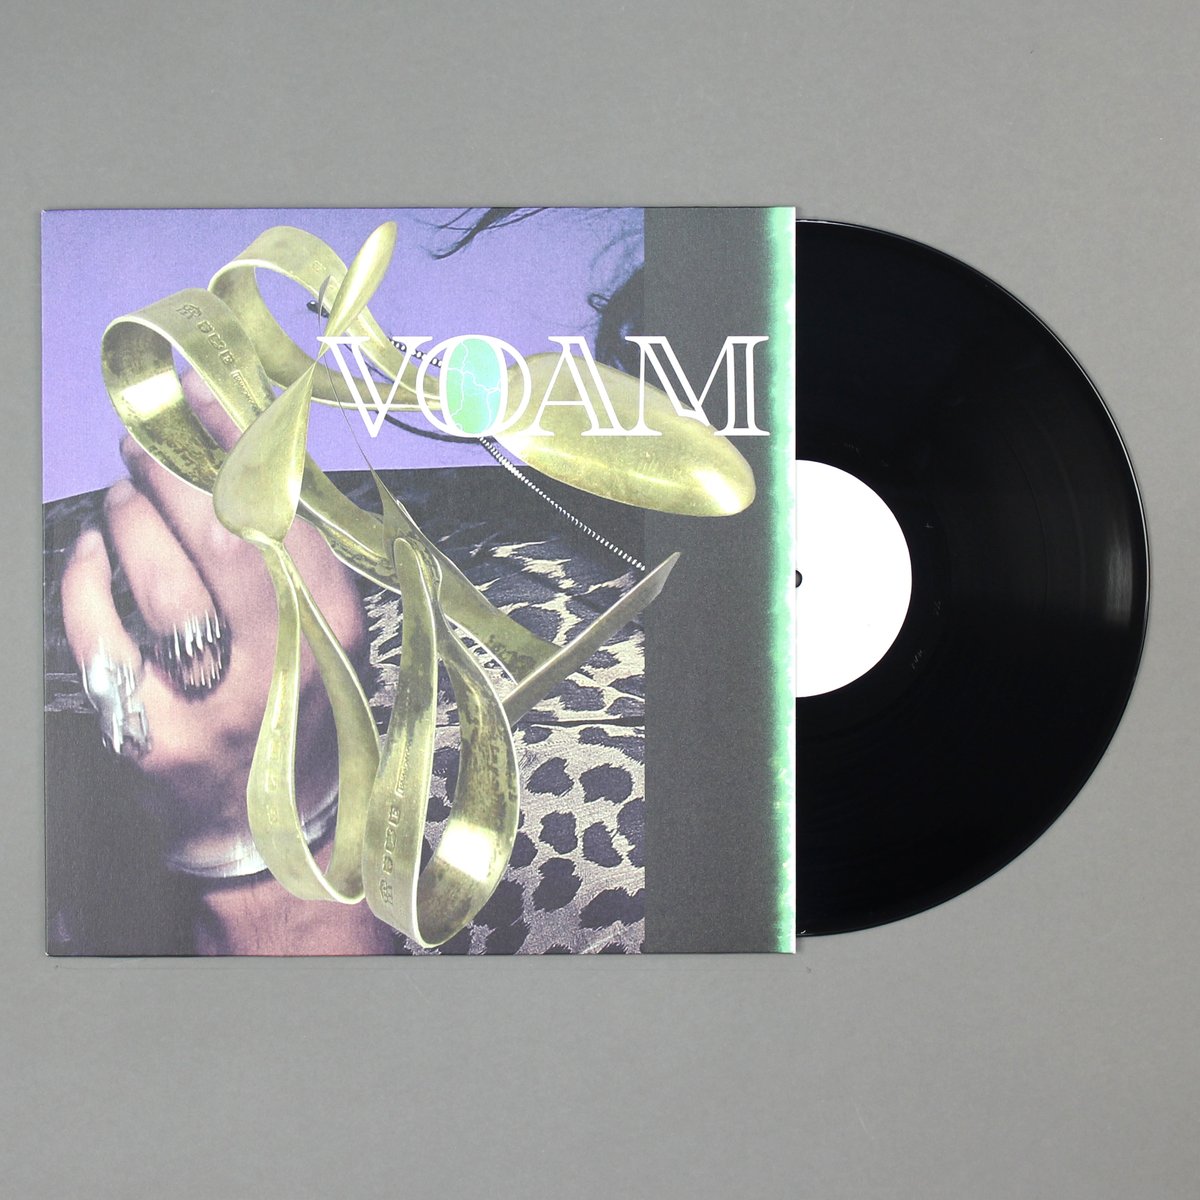 Shipping Now: Peder Mannerfelt - And The Band Played On Voam bleep.com/release/222176 In keeping with his dense back catalogue and his preceding release on Voam itself, @PederMannerfelt continues to find fresh, inventive ways to make techno sound exhilarating